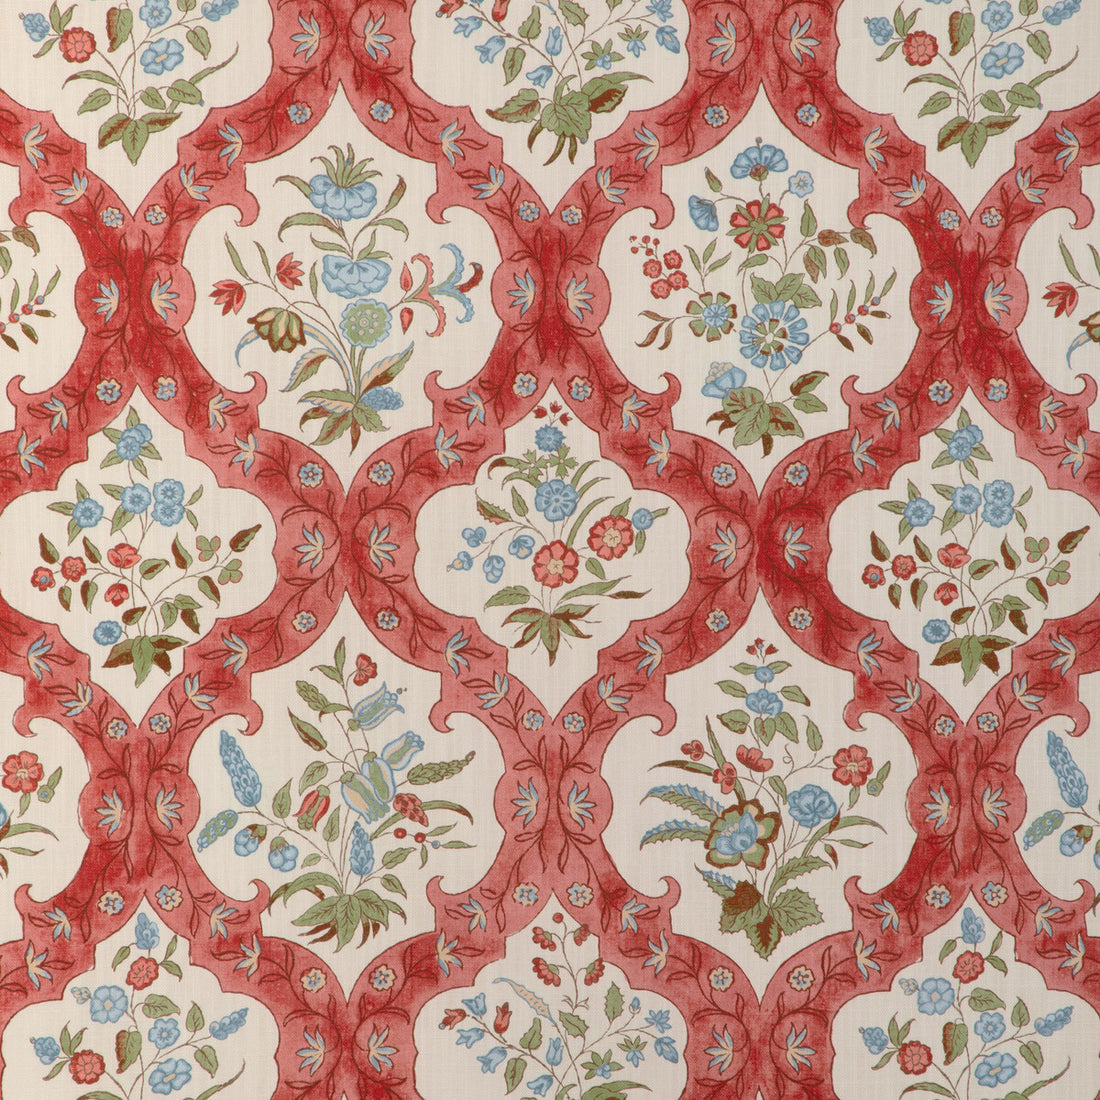 Ventoux Print fabric in red/blue color - pattern 8023102.195.0 - by Brunschwig &amp; Fils in the Cadenet collection